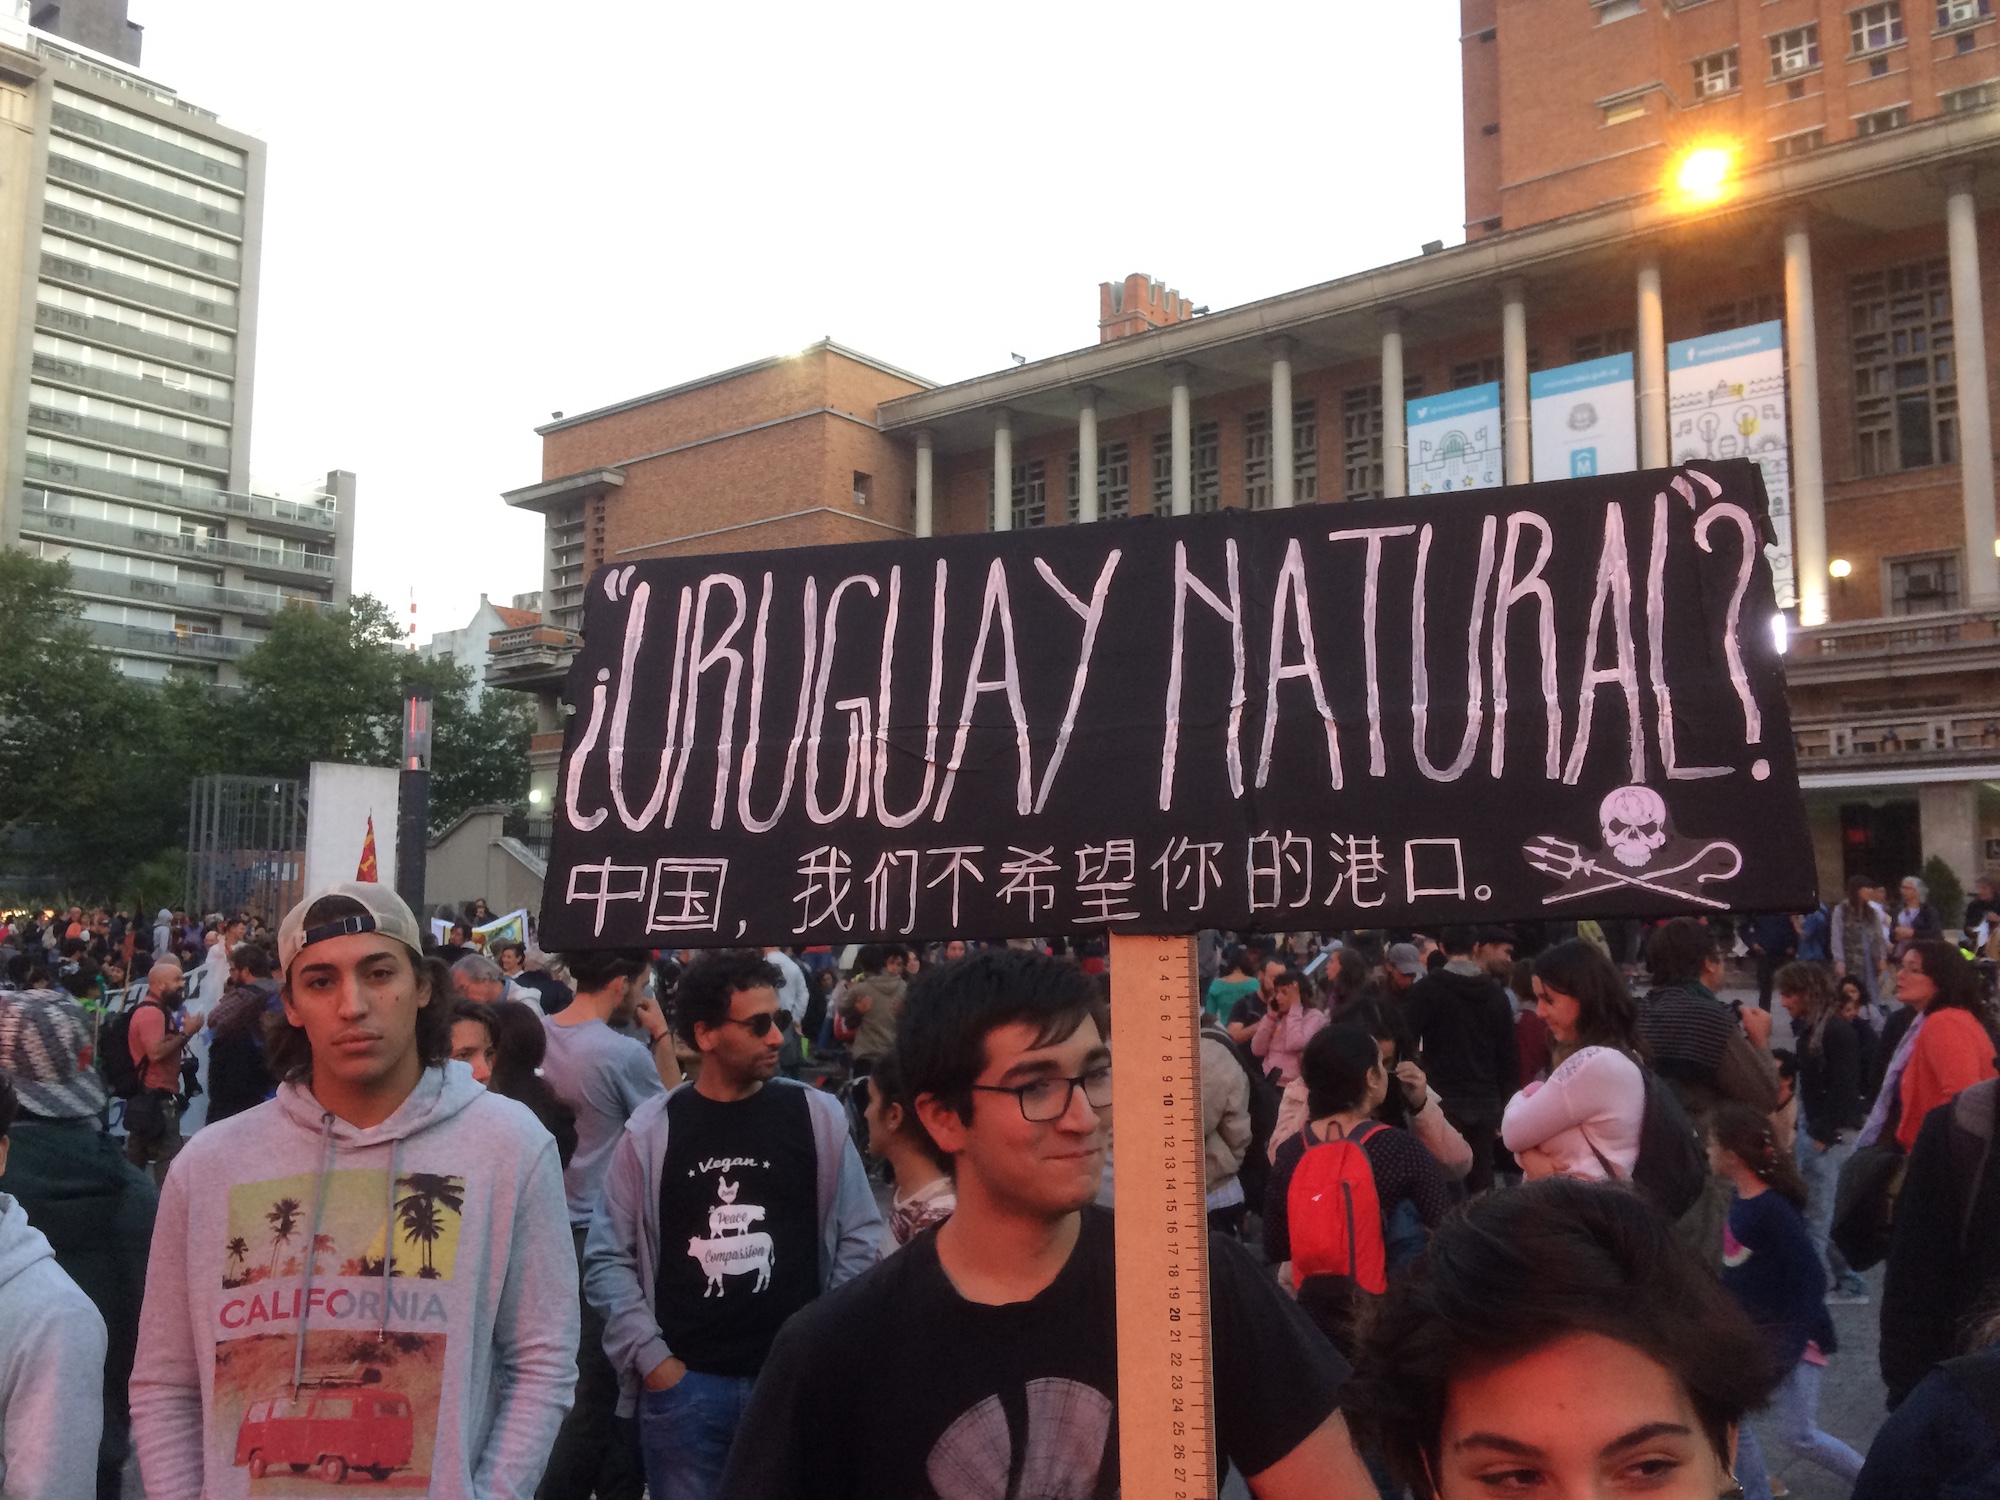 A young man holds up a banner reading "Uruguay natural?" at a protest.